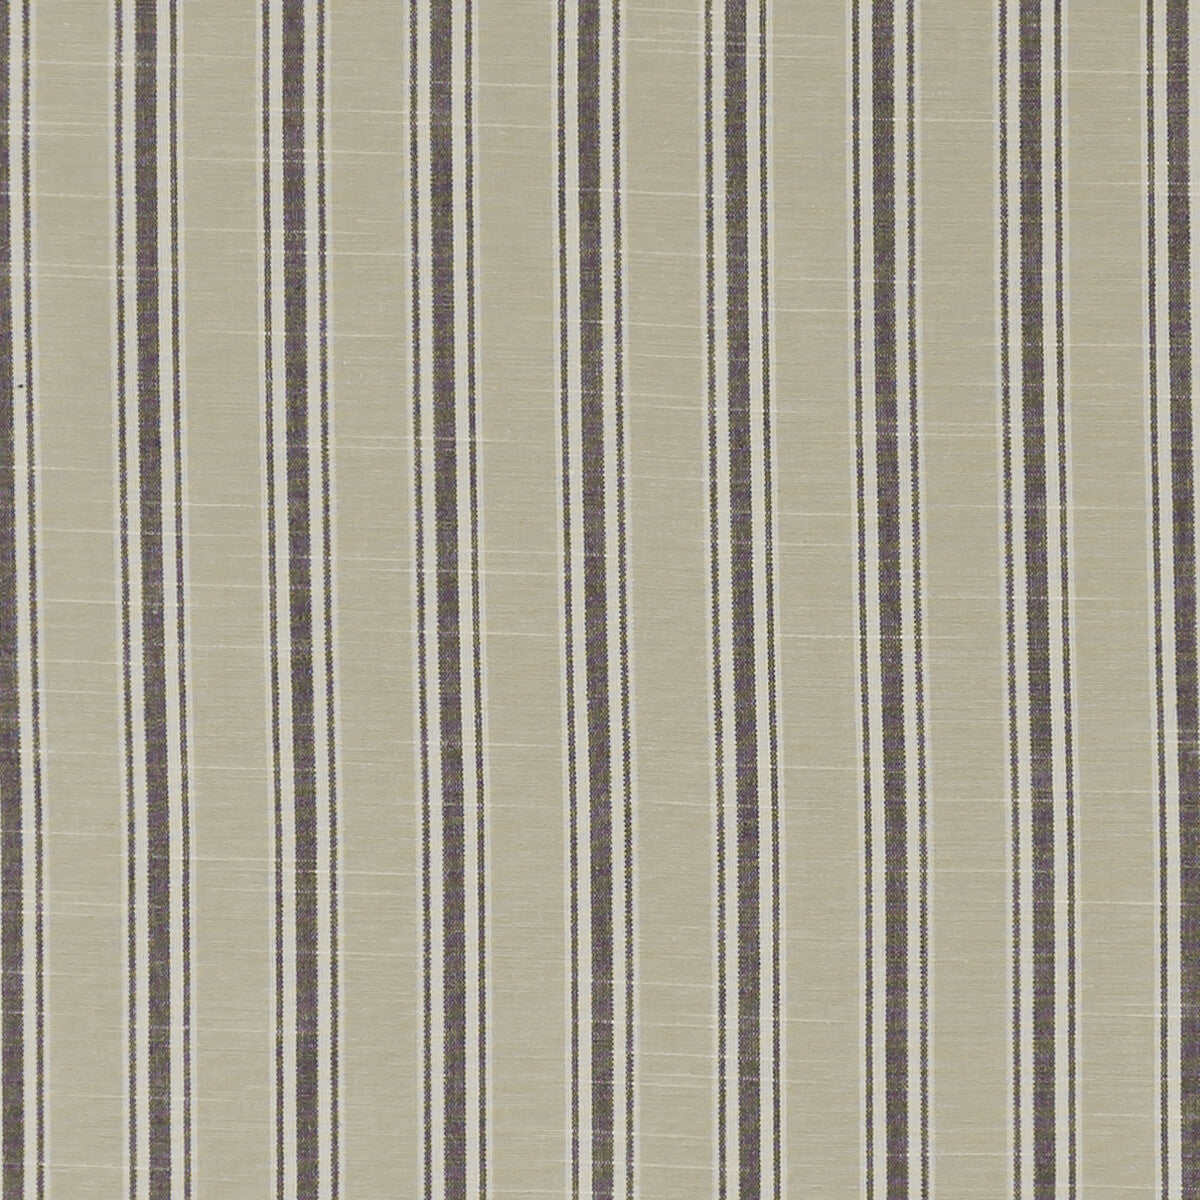 Thornwick fabric in charcoal color - pattern F1311/02.CAC.0 - by Clarke And Clarke in the Bempton By Studio G For C&amp;C collection